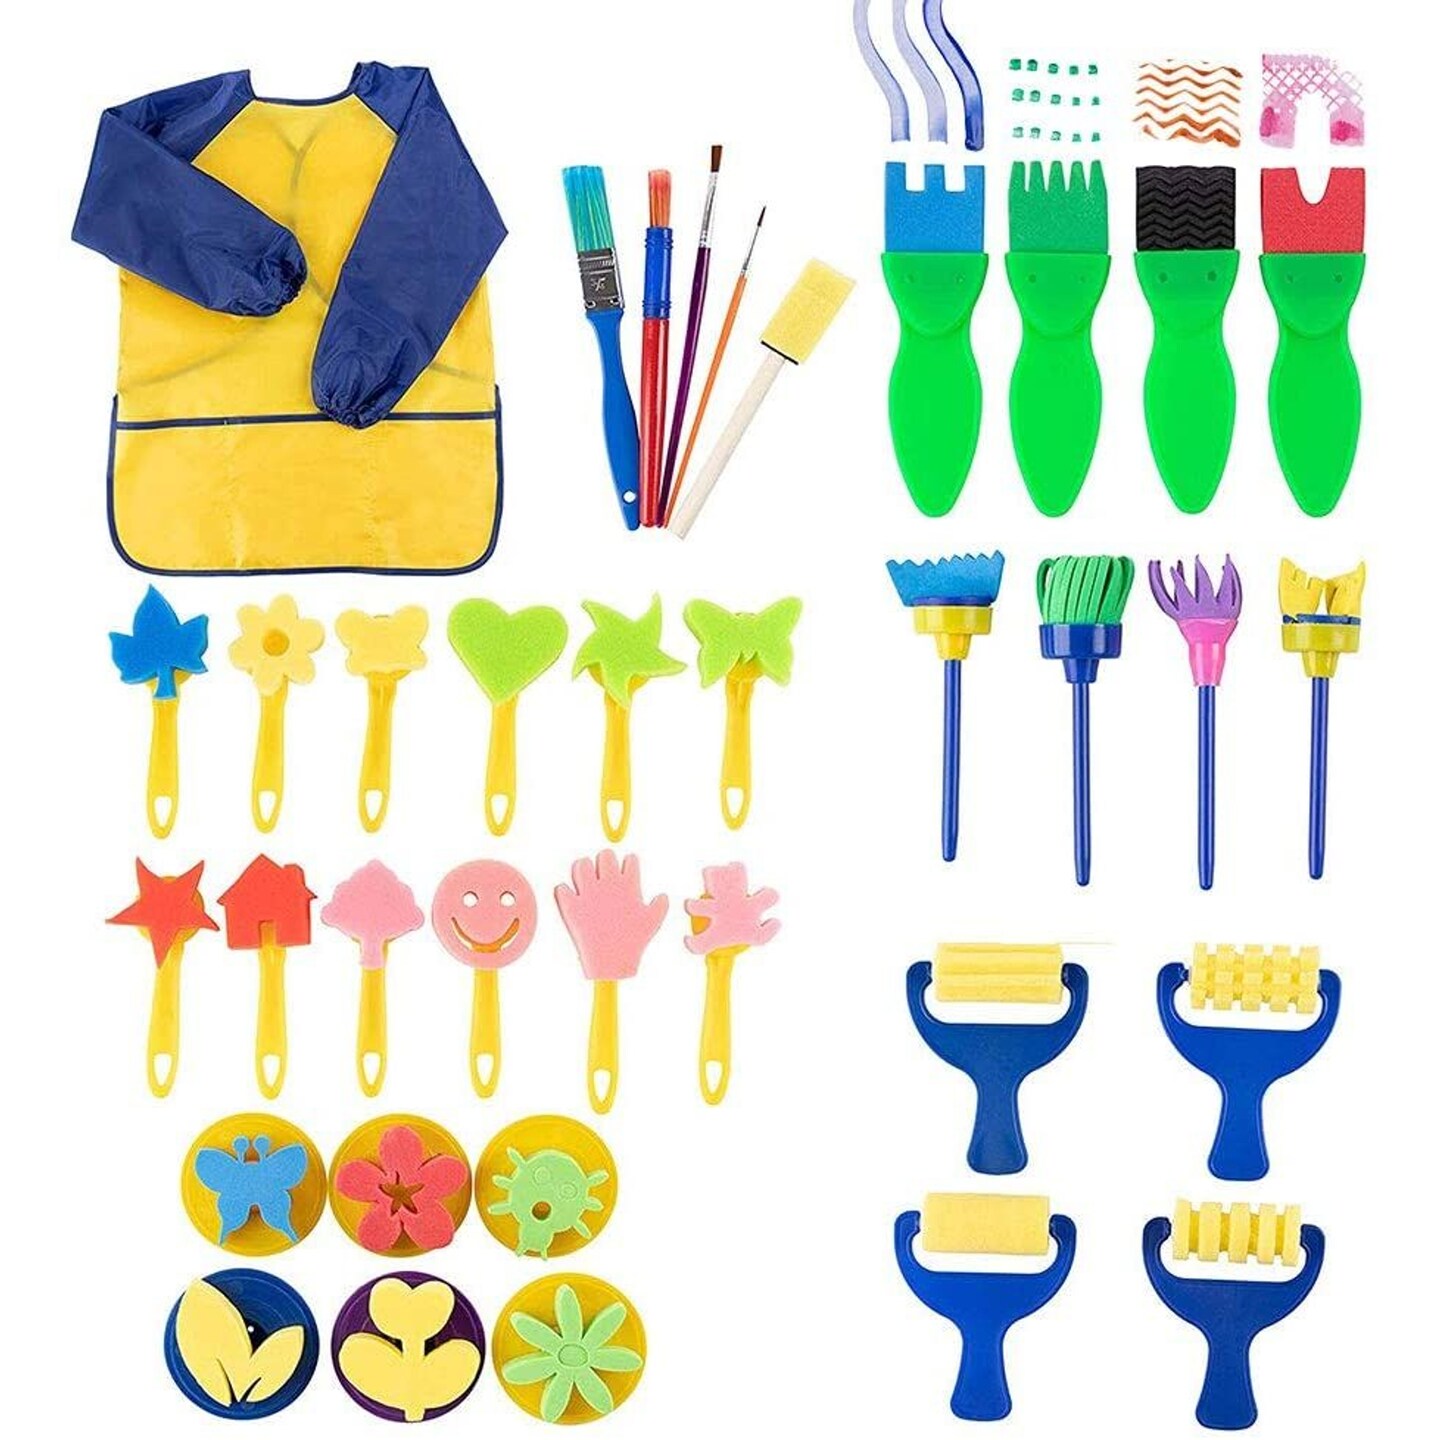 36 Piece Kids Painting Kit for Arts and Crafts with Foam Paint Brushes, Rollers and Stamps